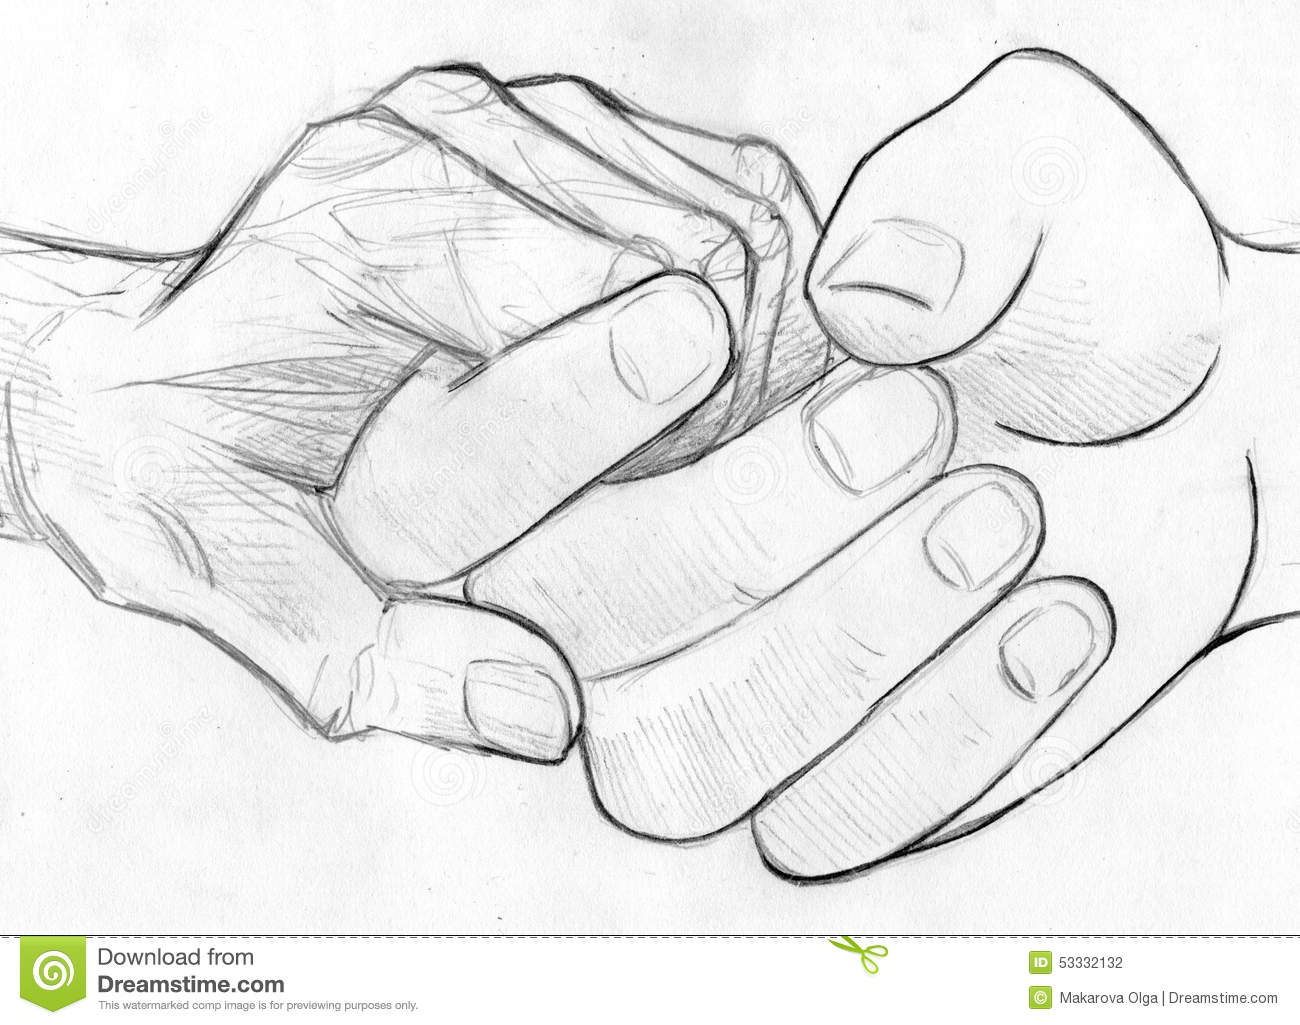  Hands Holding World Drawing at GetDrawings com Free for 